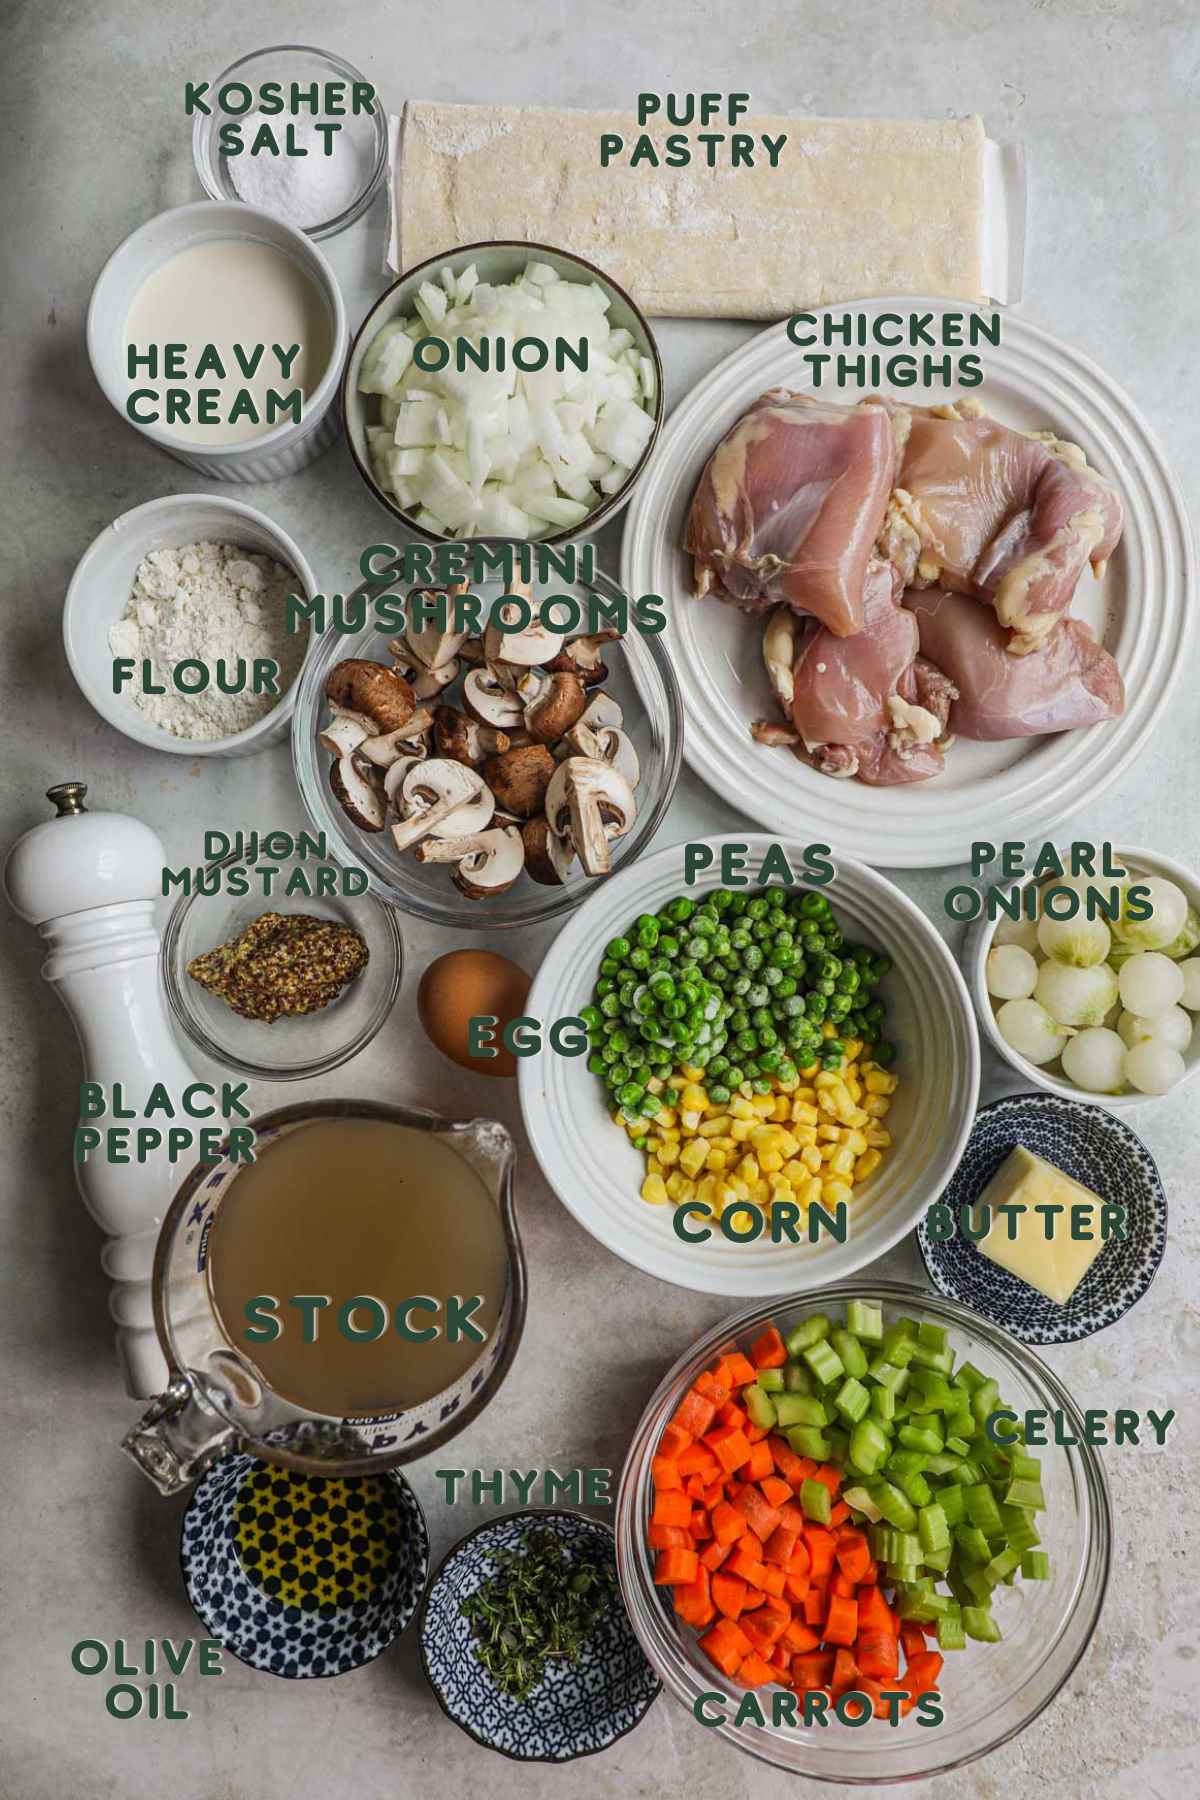 Ingredients to make puff pastry chicken pot pie, puff pastry, heavy cream, onion, chicken, mushrooms, flour, mustard, peas, carrots, butter, thyme, celery, carrots, stock.